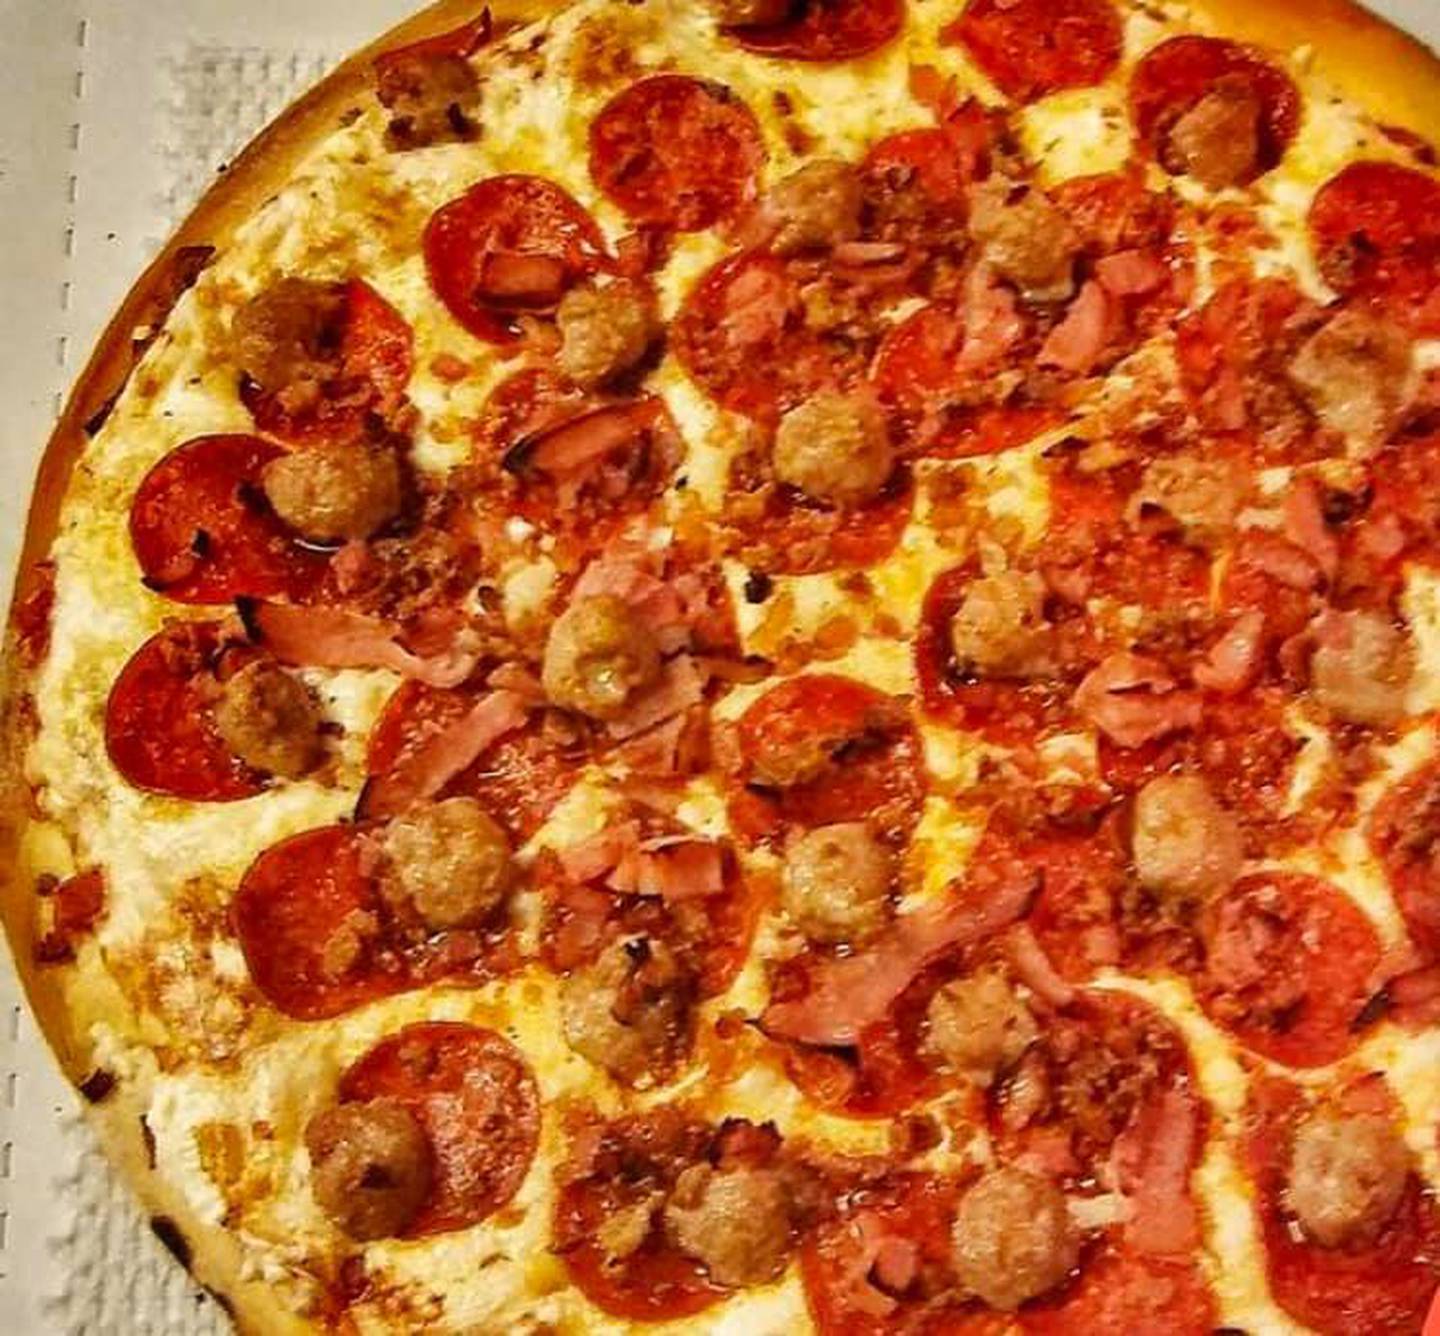 Maurie's Table Pizza & Pub was named one of the best deep dish pizza places in Will County in 2021 by readers. (Photo from Maurie's Table Pizza & Pub Facebook page)